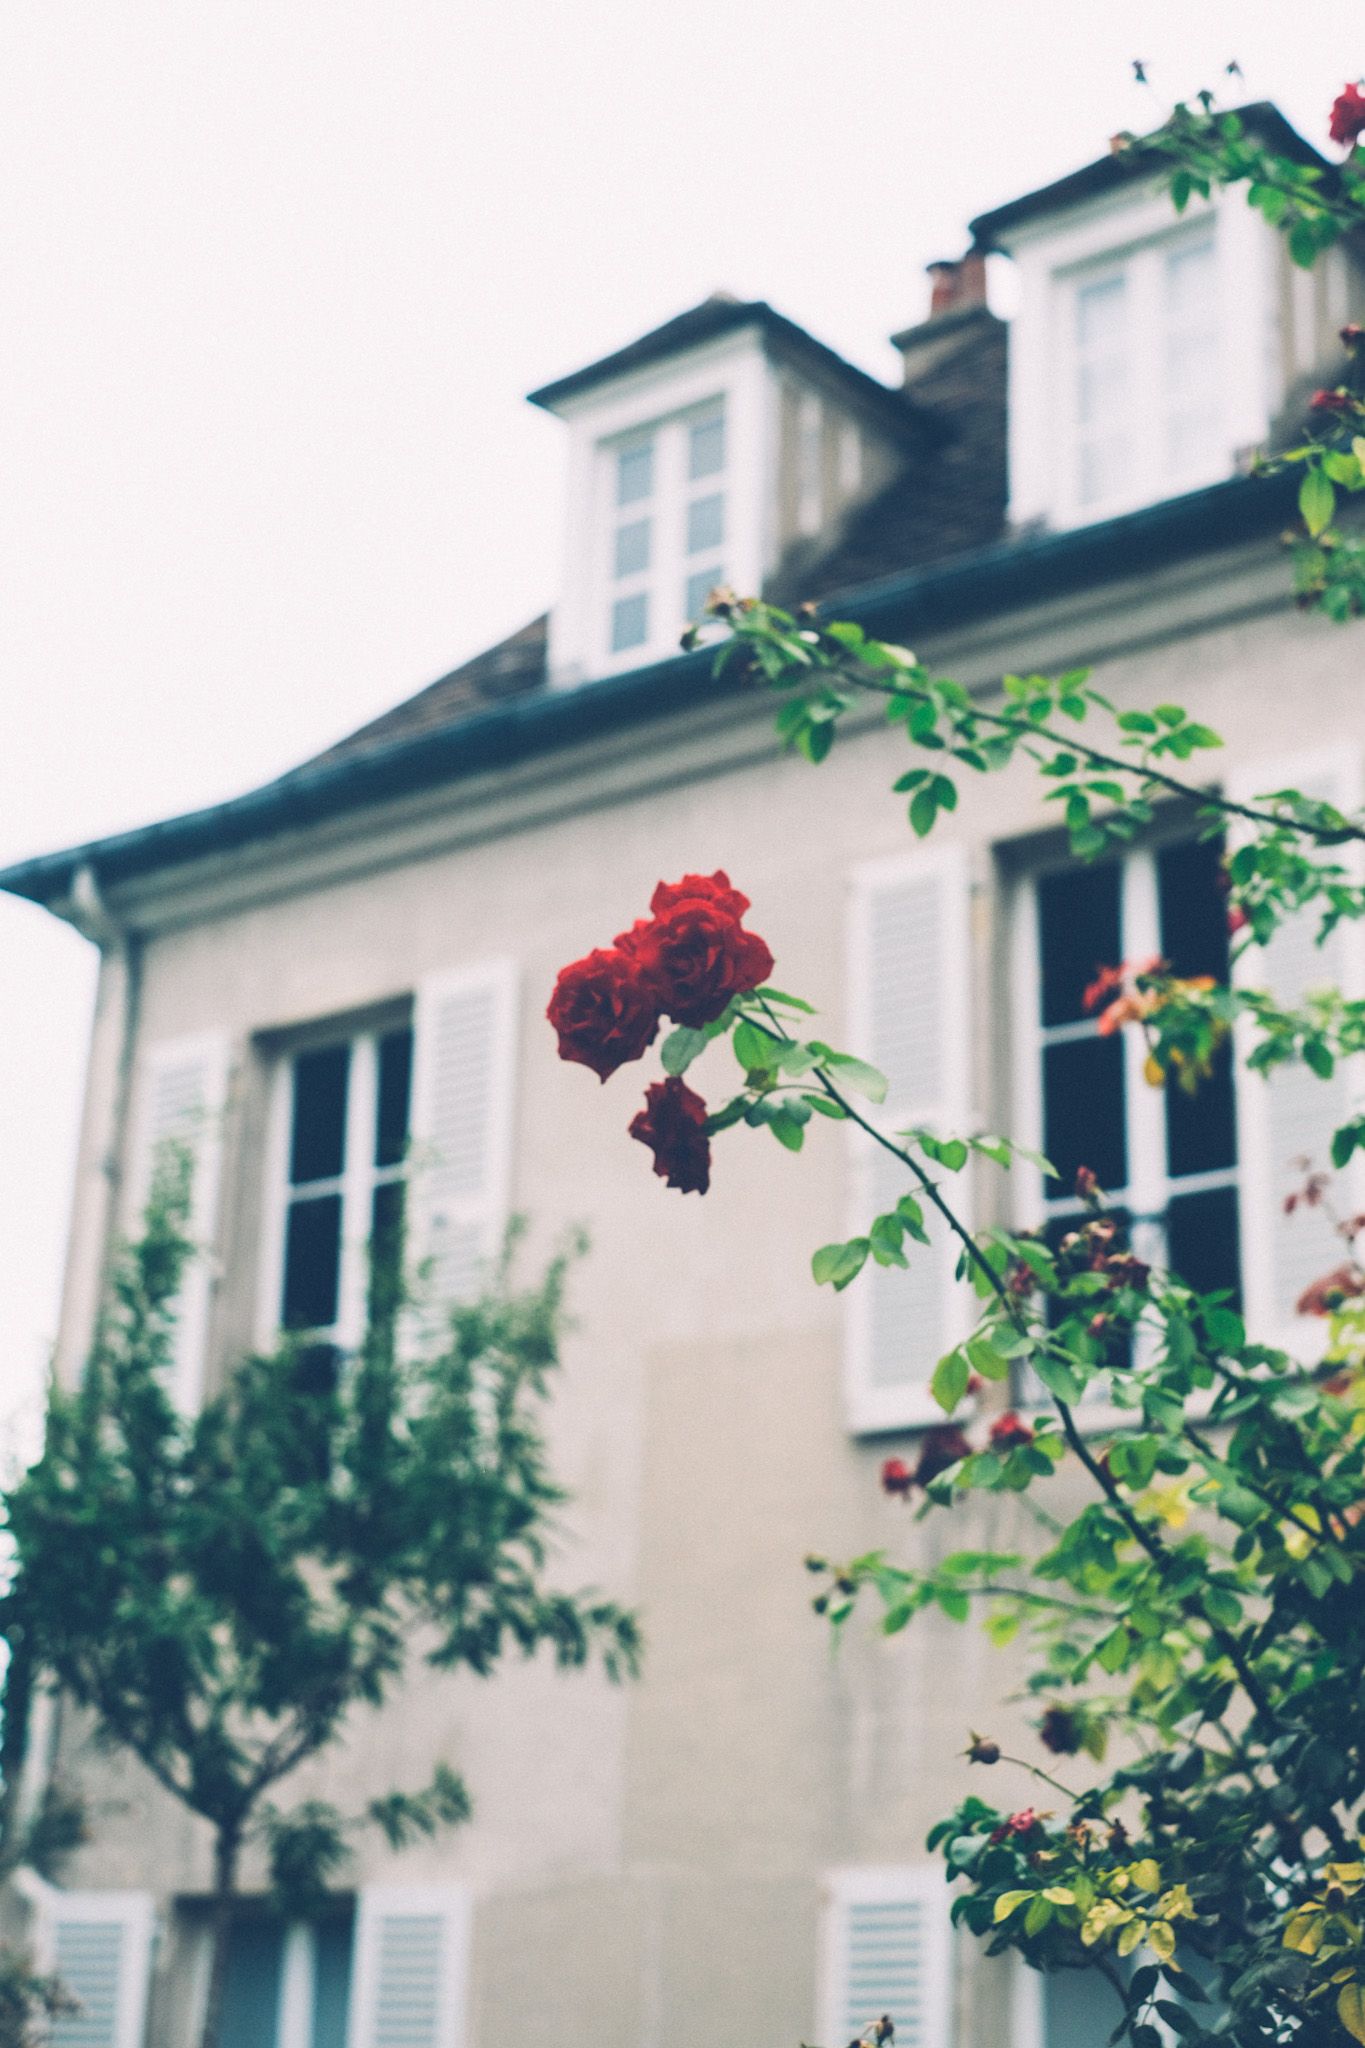 In front of a white French house, a red rose rises.